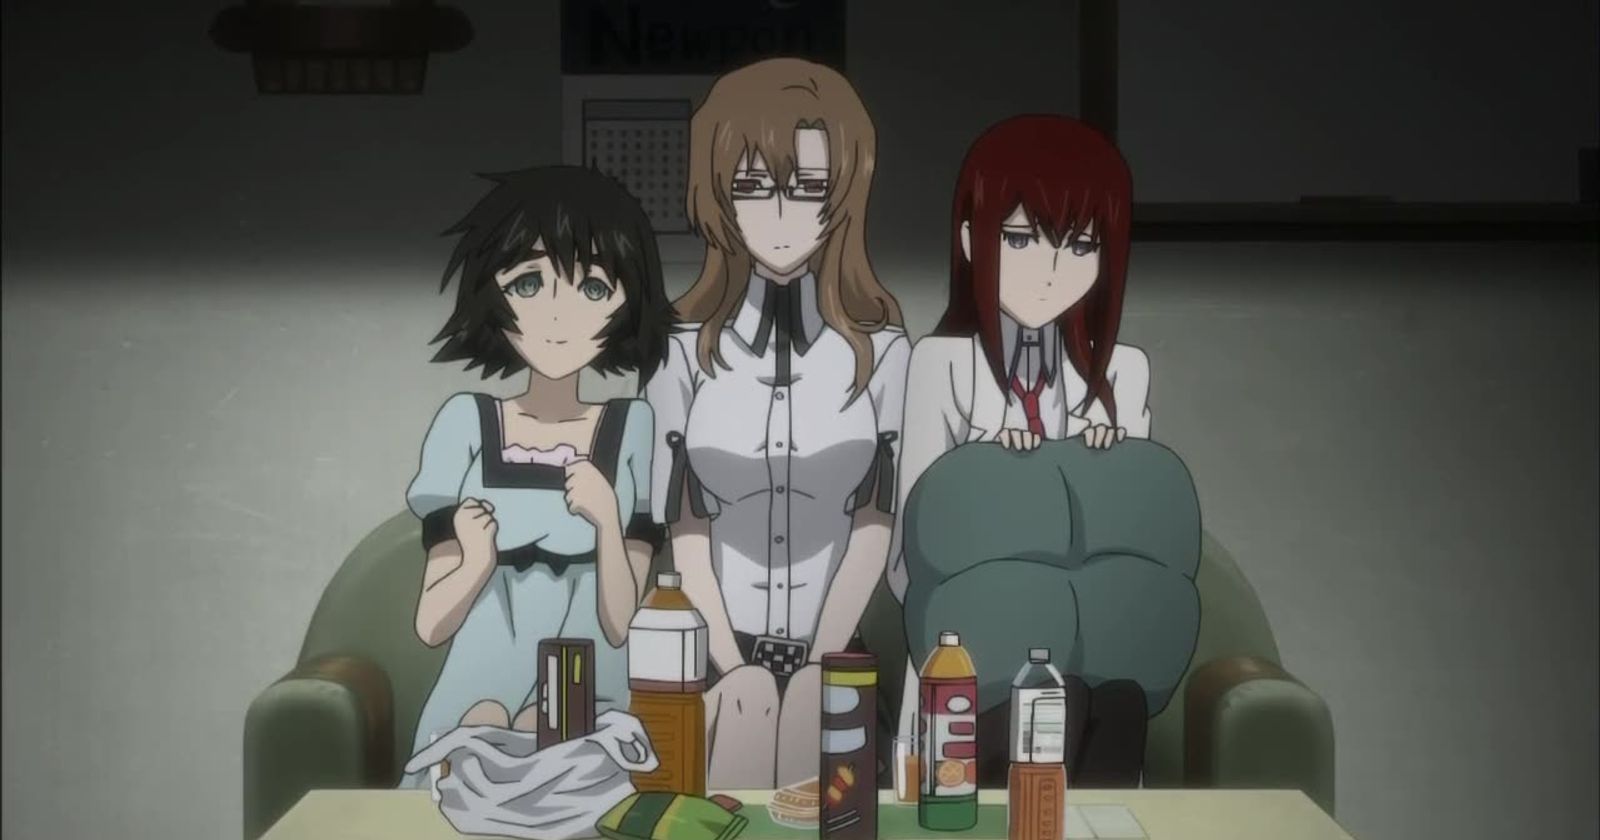 How to watch Steins;Gate on Netflix in the UK - UpNext by Reelgood